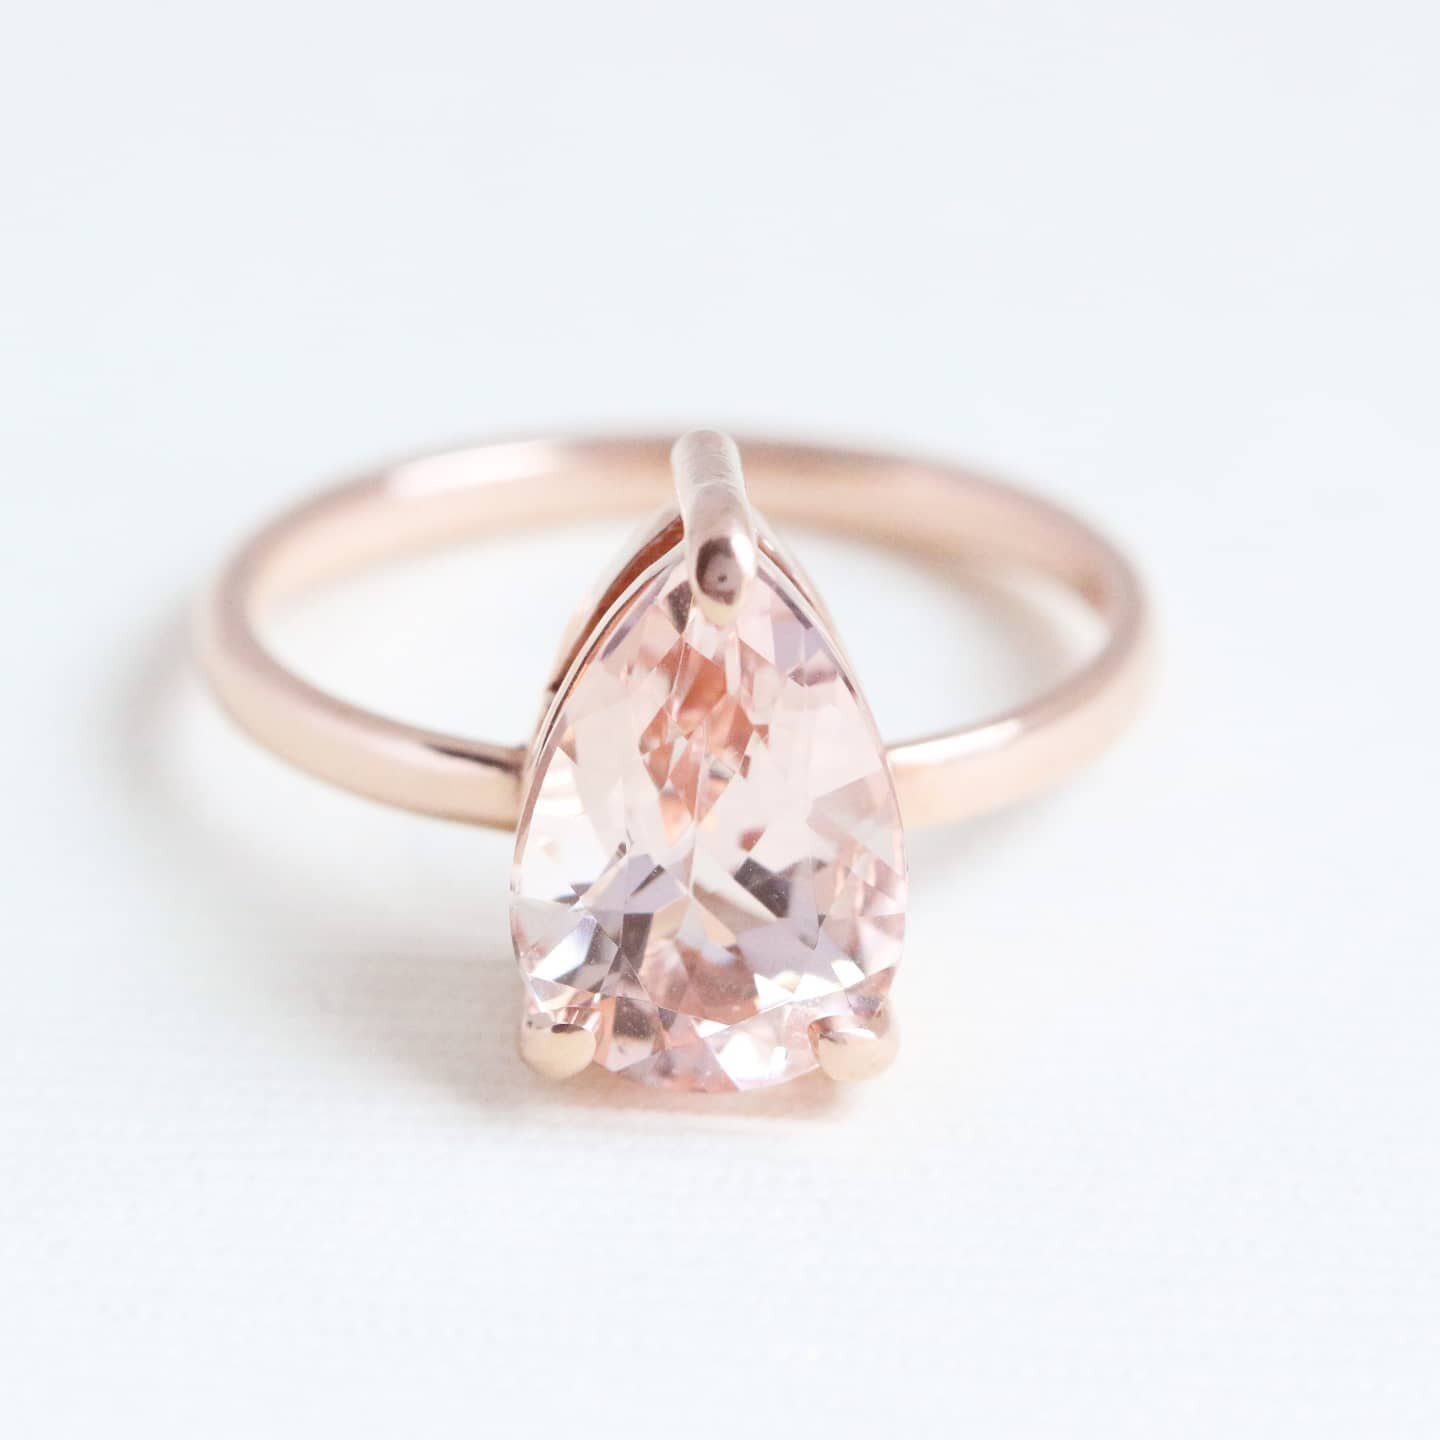 &quot;Keep walking through the storm. Your rainbow is waiting on the other side.&quot; 
- Heather Stillufsen

In this picture: the Princess engagement ring in 14k rose gold and morganite looking like candy 💕